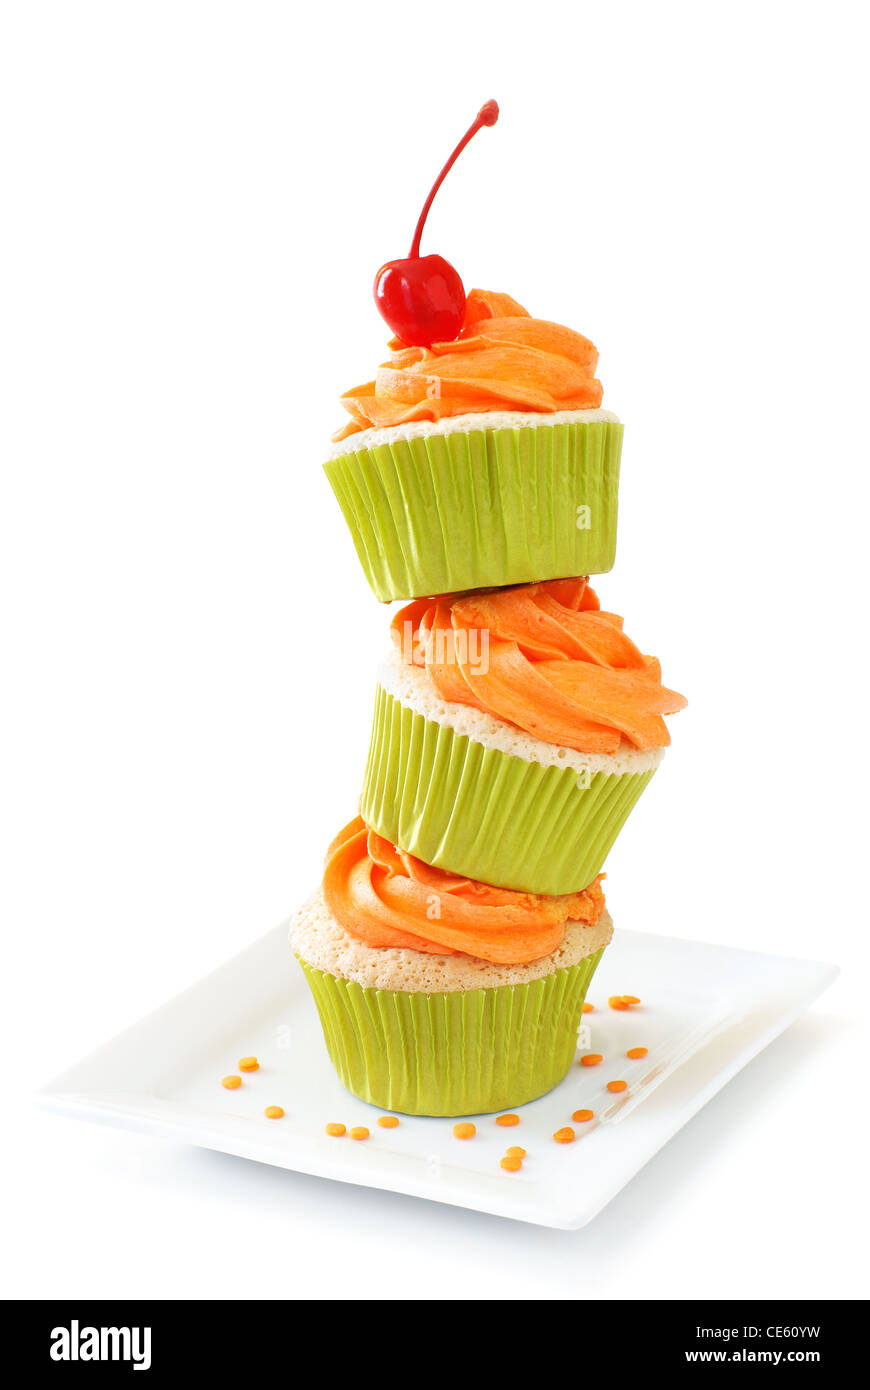 Stacked vanilla cupcakes with orange colored vanilla frosting Stock Photo